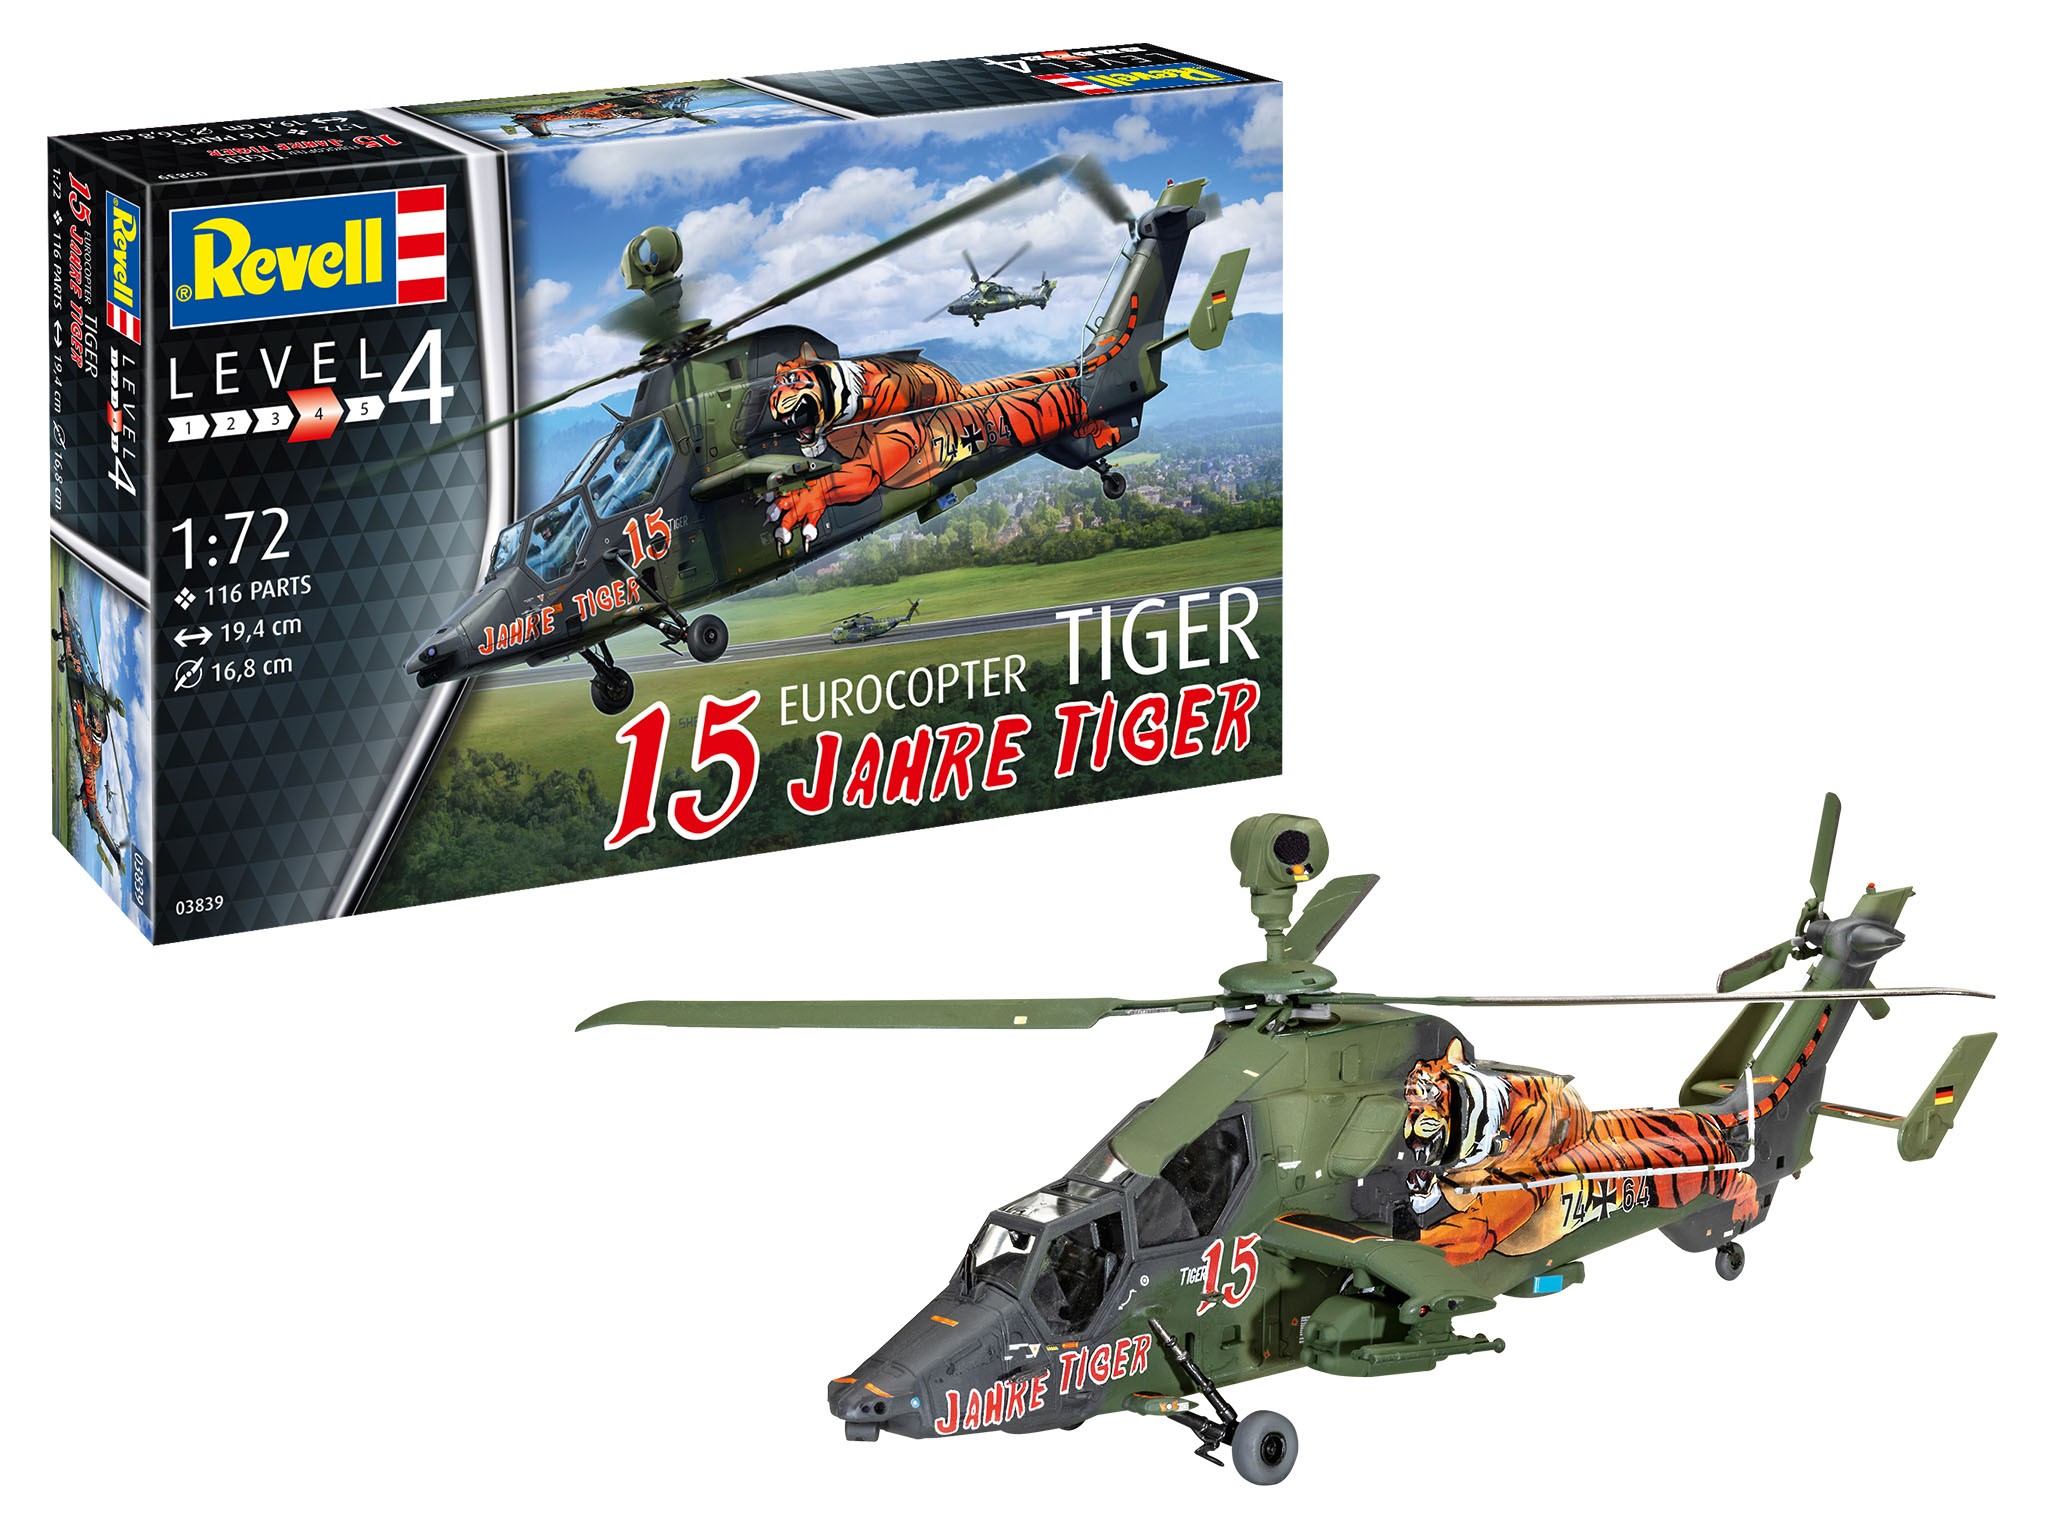 Revell 03839 Eurocopter Tiger "15 Years Tiger  1:72